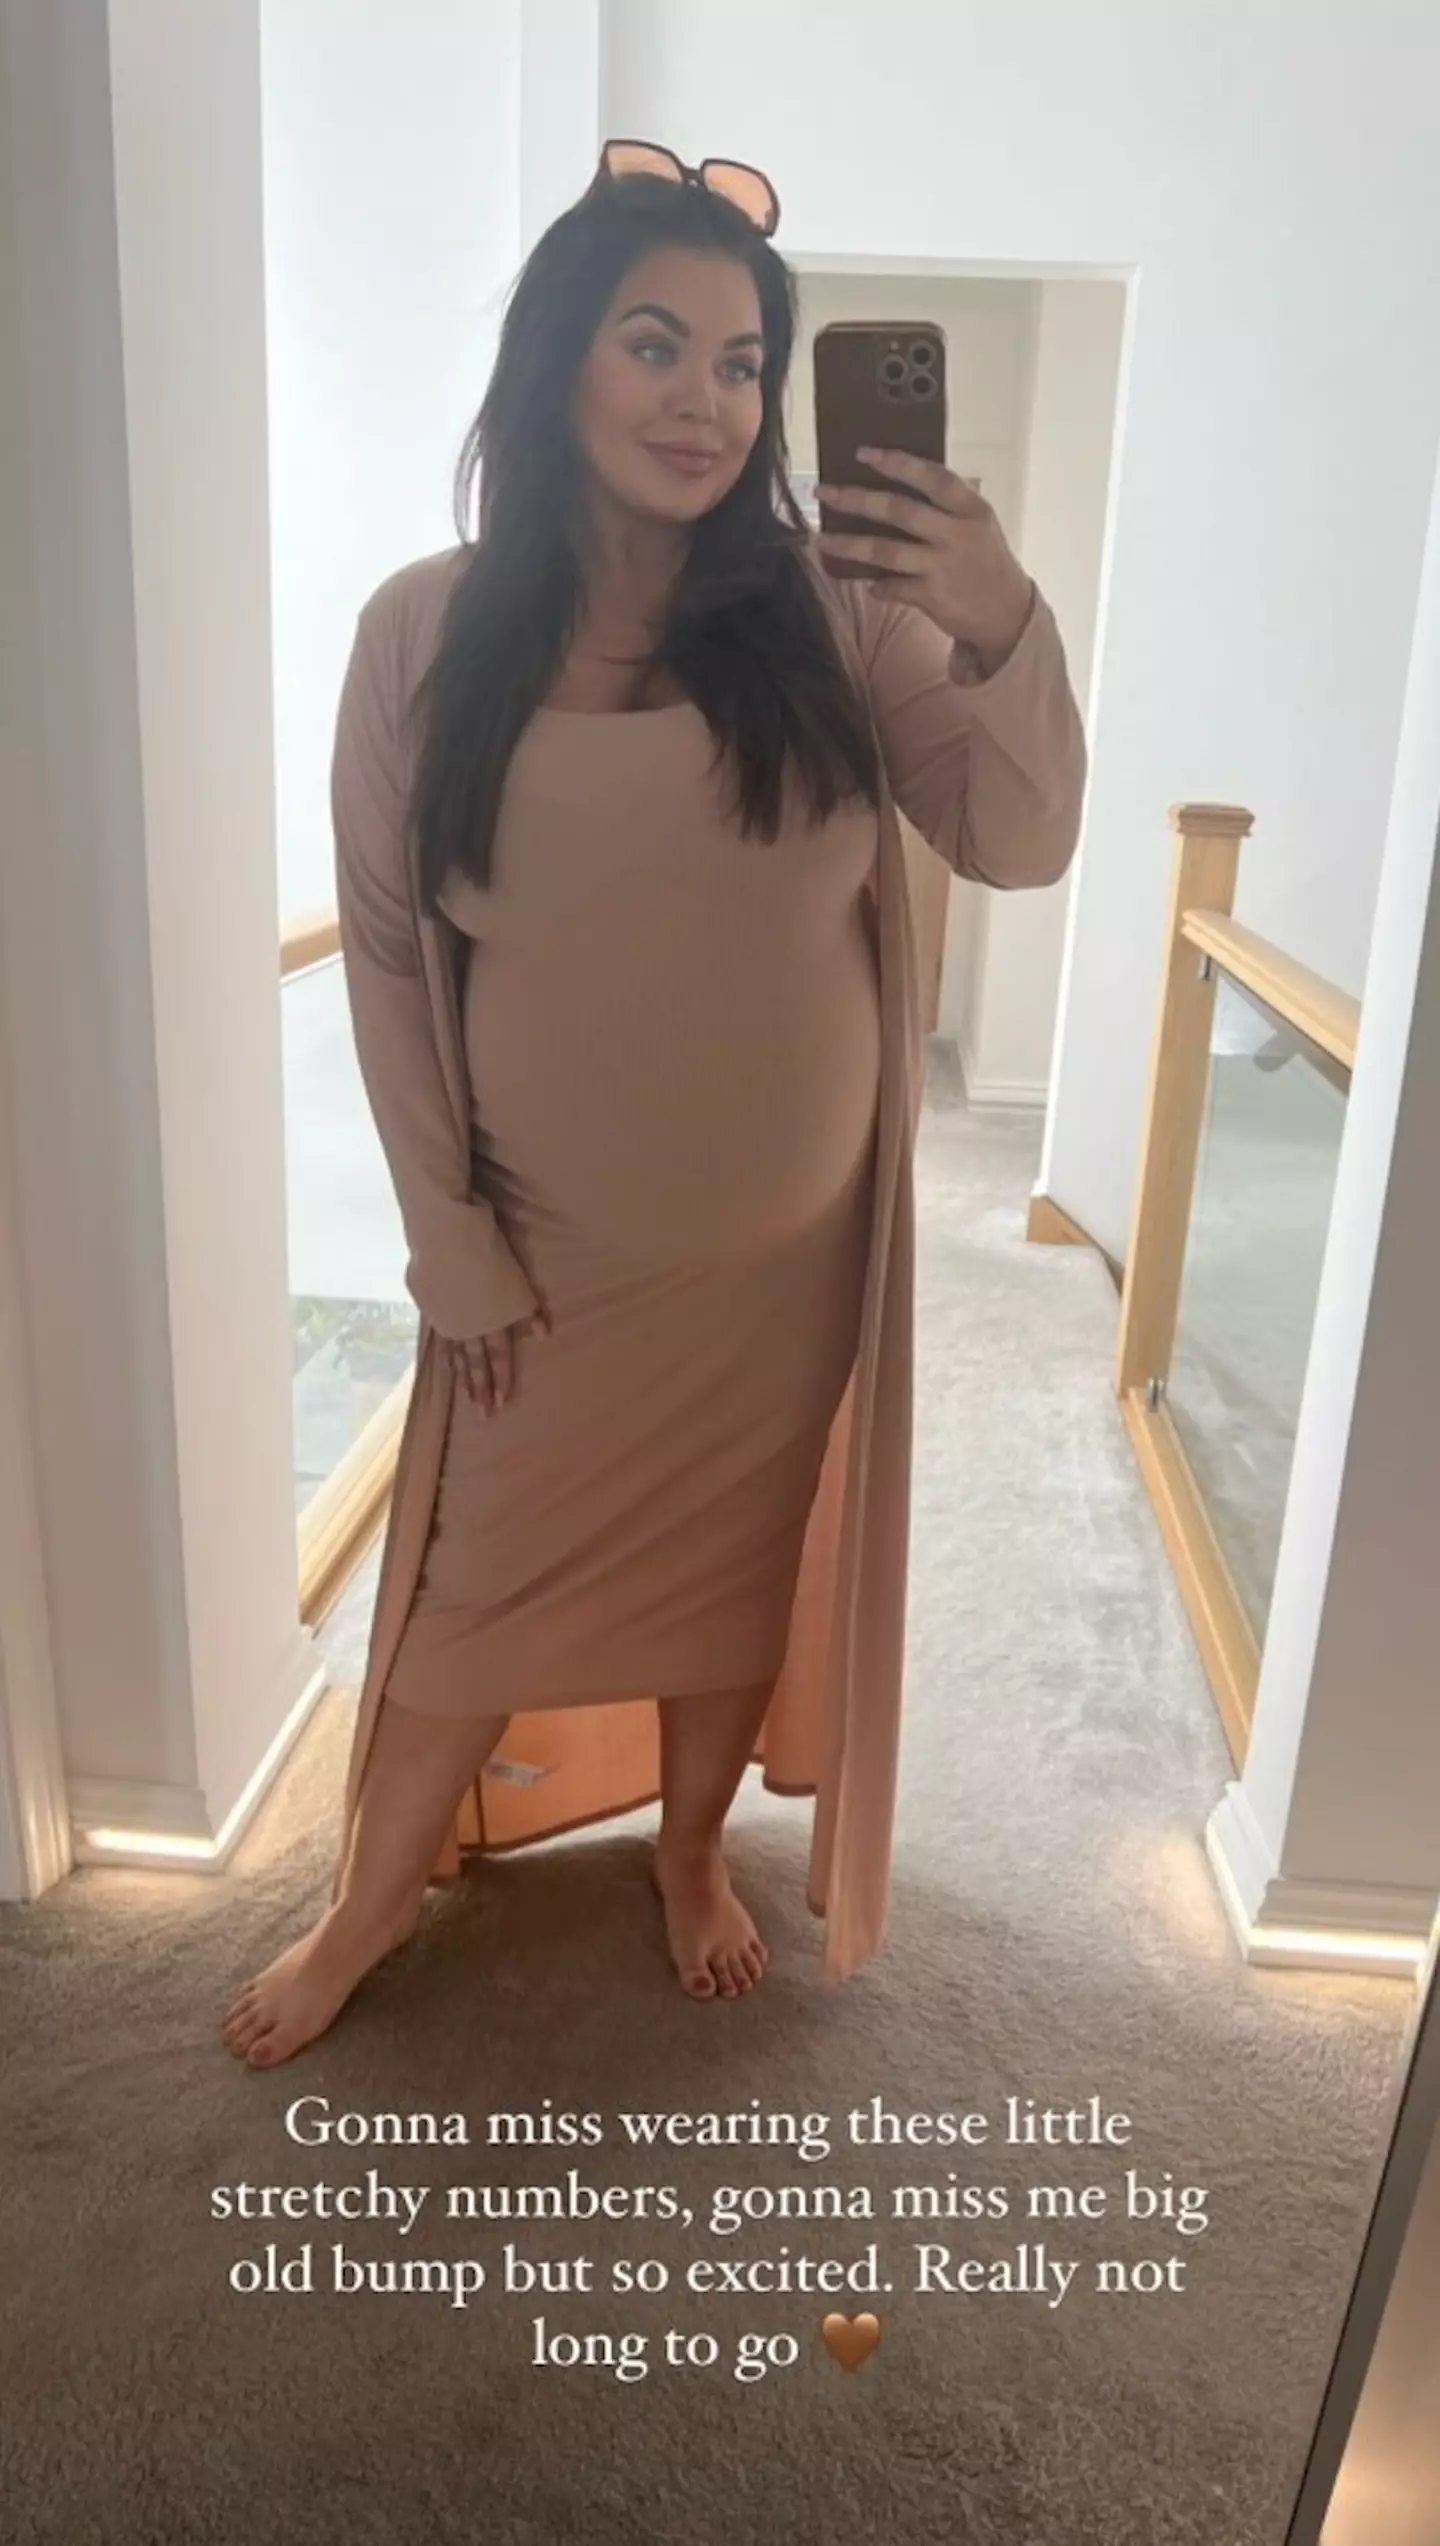 Scarlett Moffatt has said there is 'not long to go' before she welcomes her baby boy.